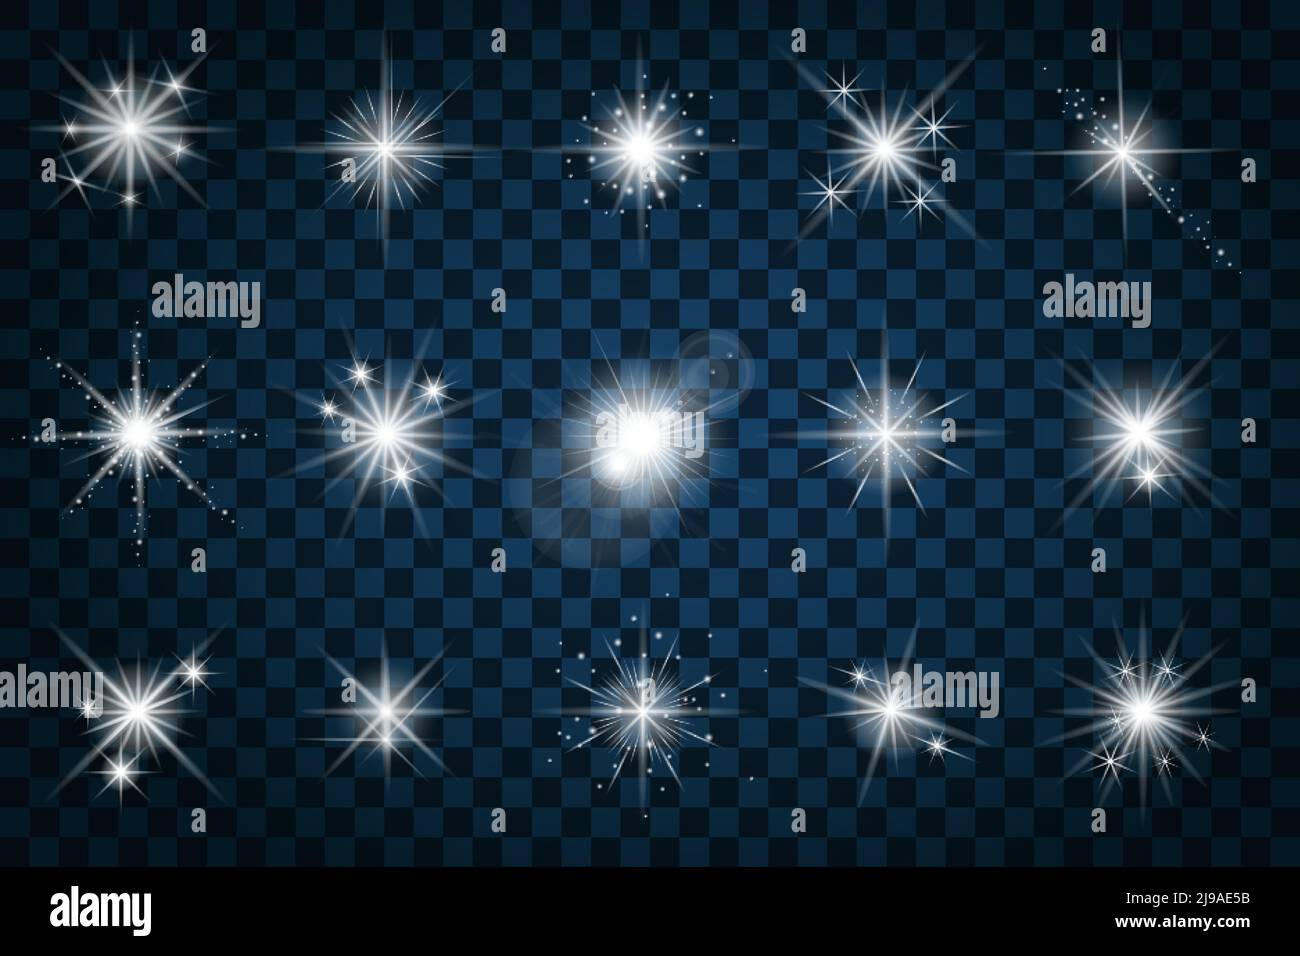 Scintillation light stock photography and images - Alamy